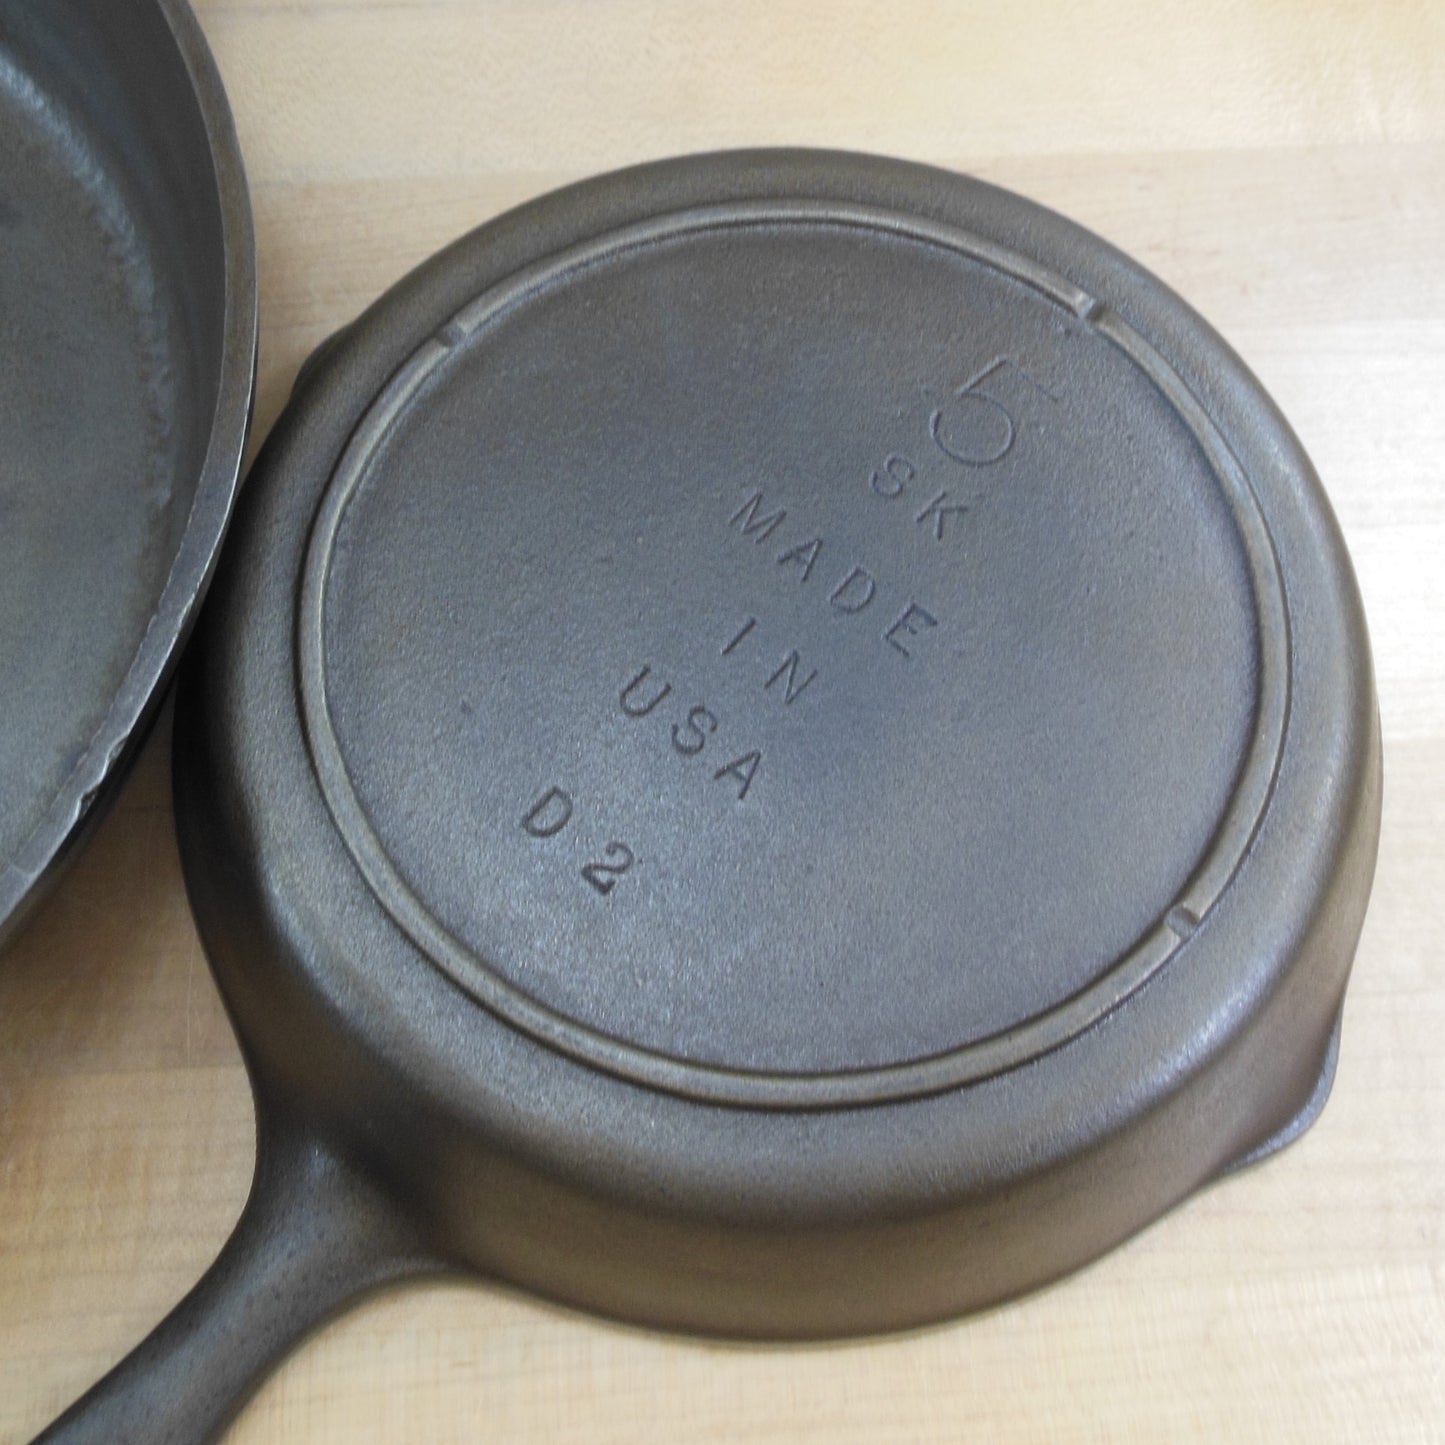 Made in USA by Lodge No 10 Cast Iron Skillet